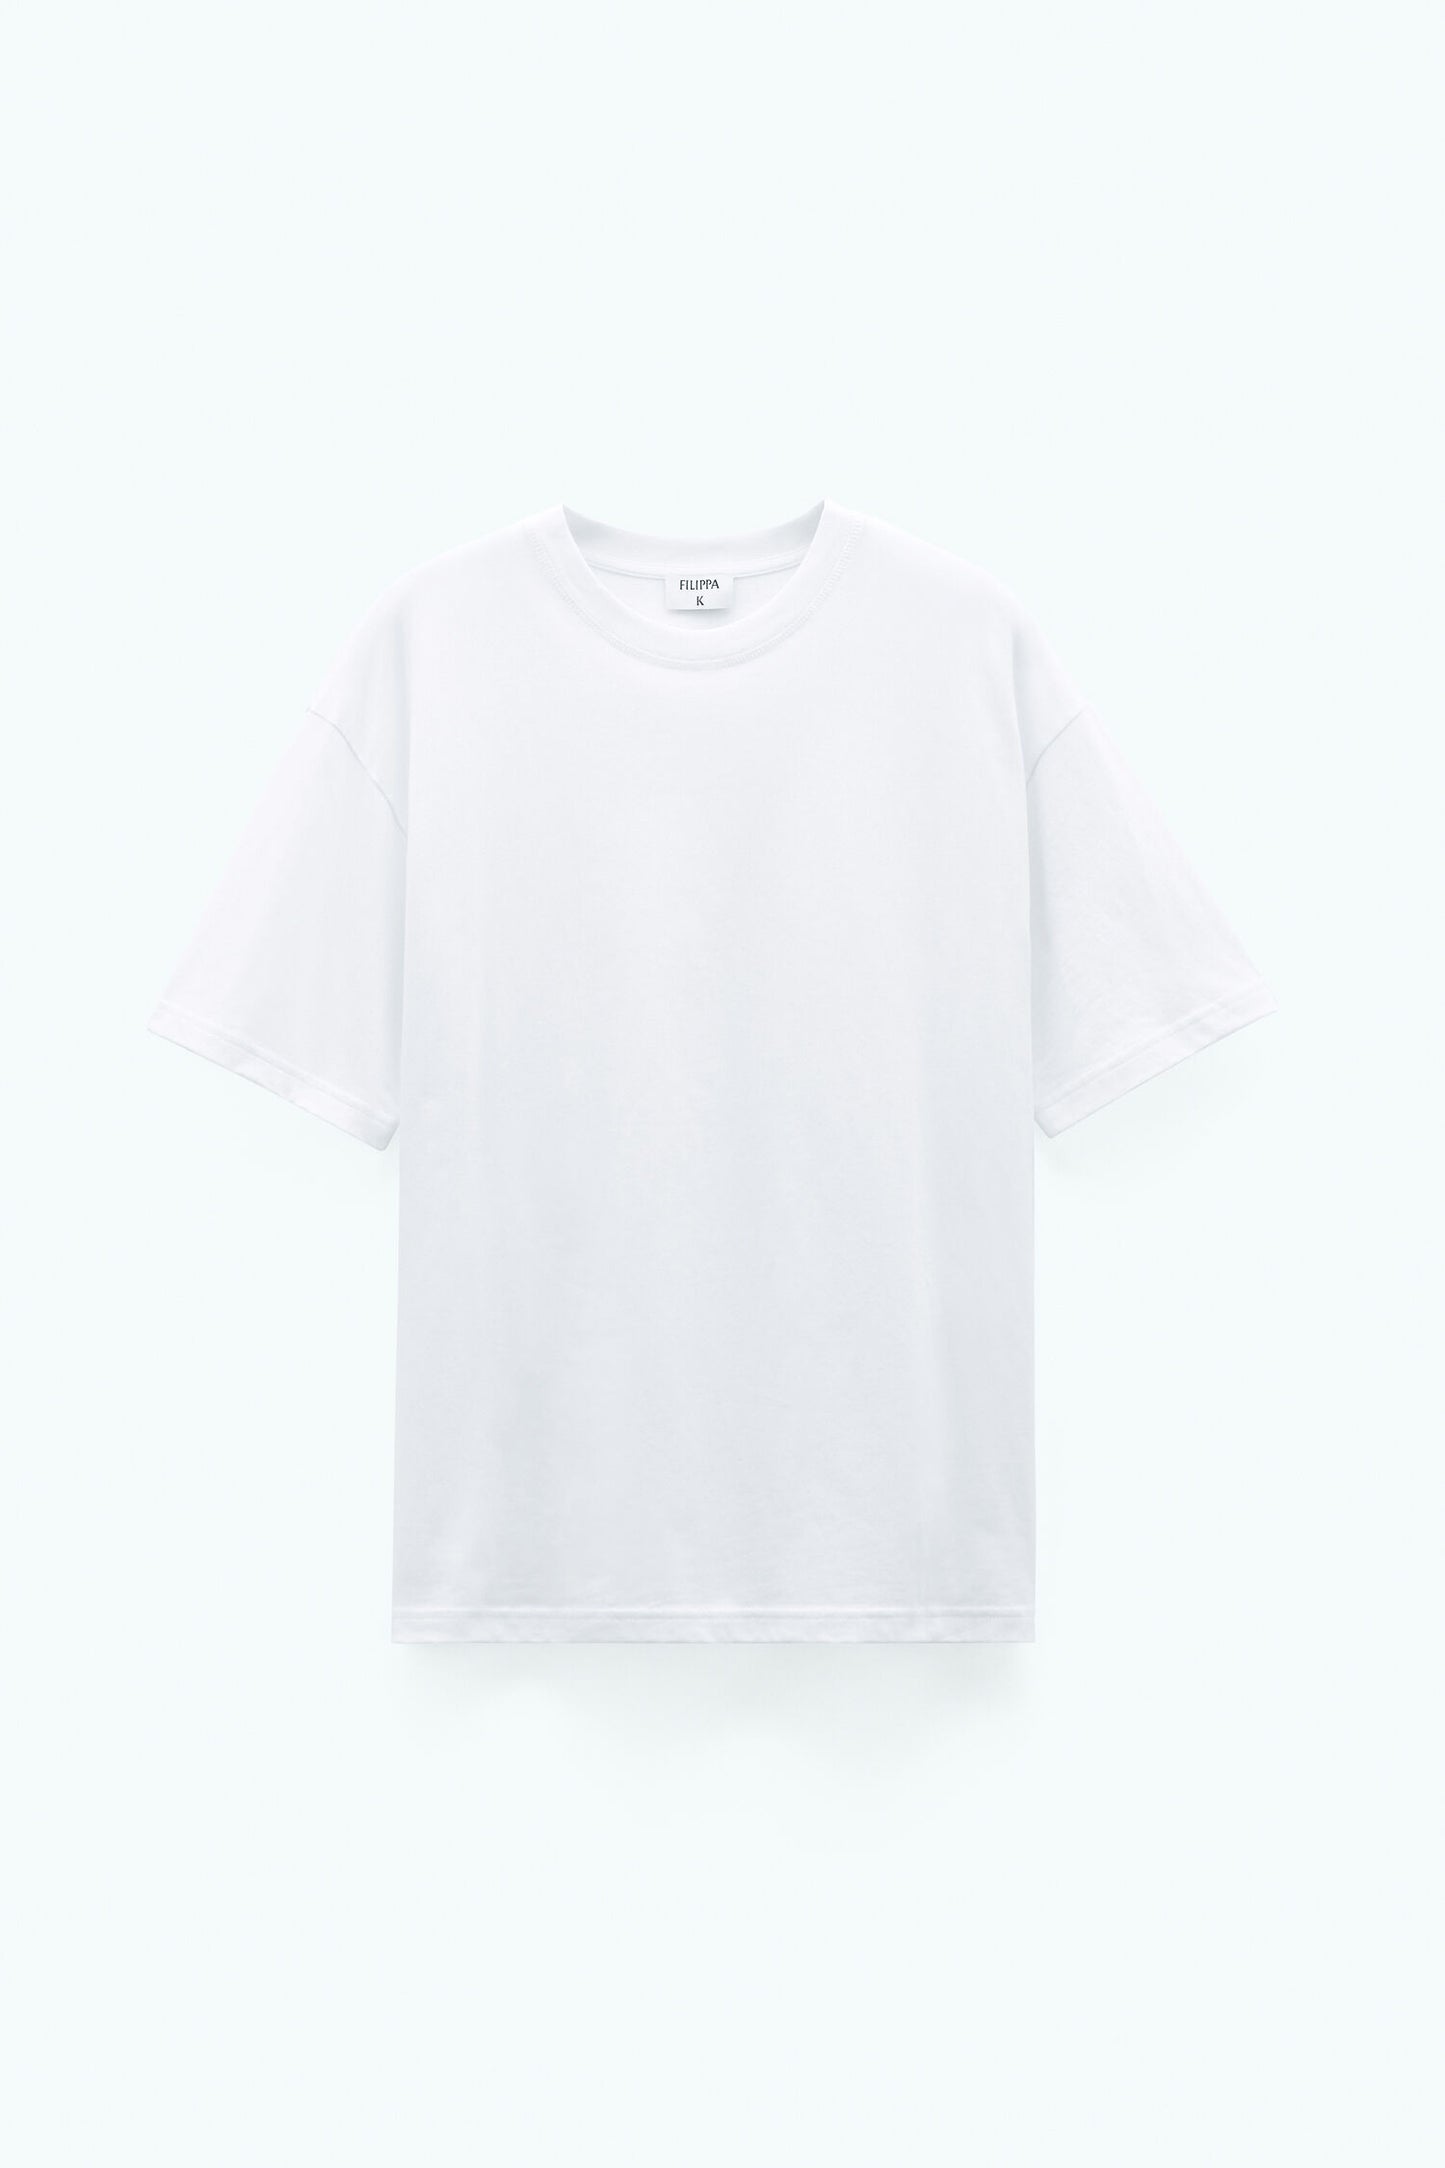 Loose Fit Tee White